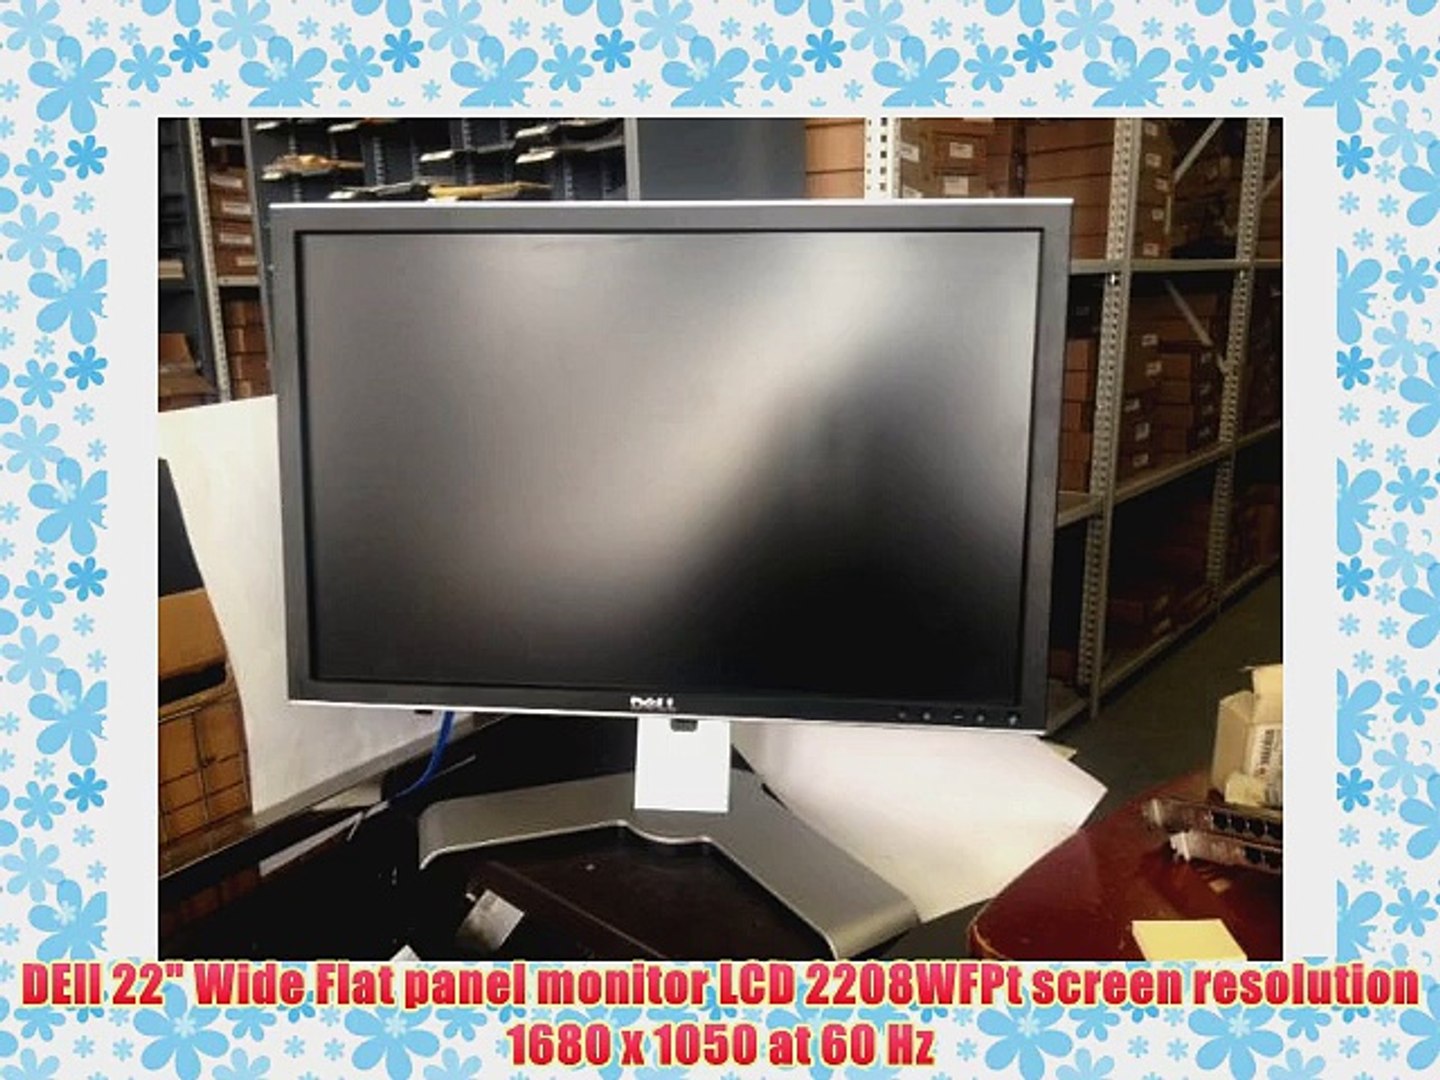 Dell 22 Wide Flat Panel Monitor Lcd 28wfpt Screen Resolution 1680 X 1050 At 60 Hz Video Dailymotion